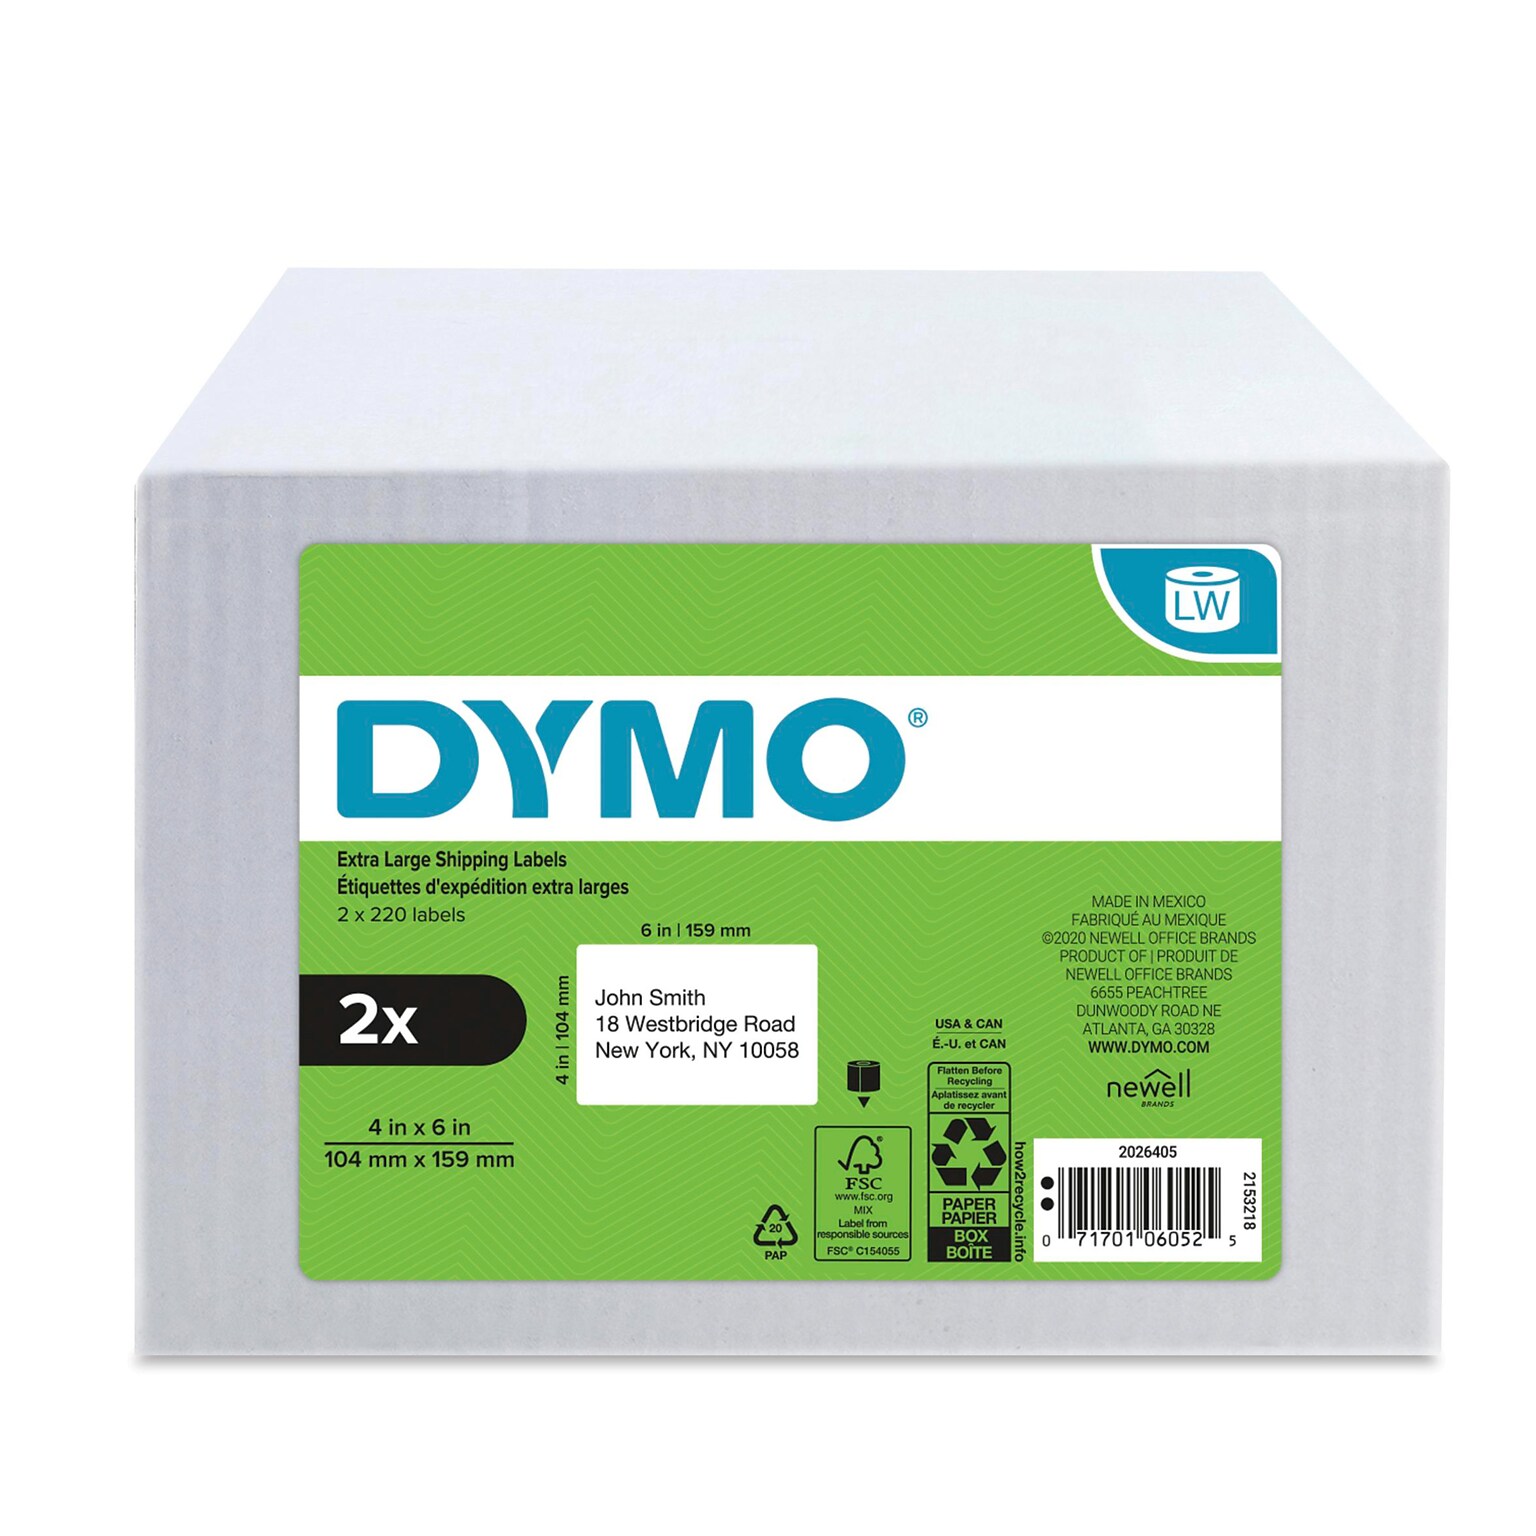 DYMO LabelWriter 2026405 Extra Large Shipping Labels, 4 x 6, Black on White, 220 Labels/Roll, 2 Rolls/Pack (2026405)